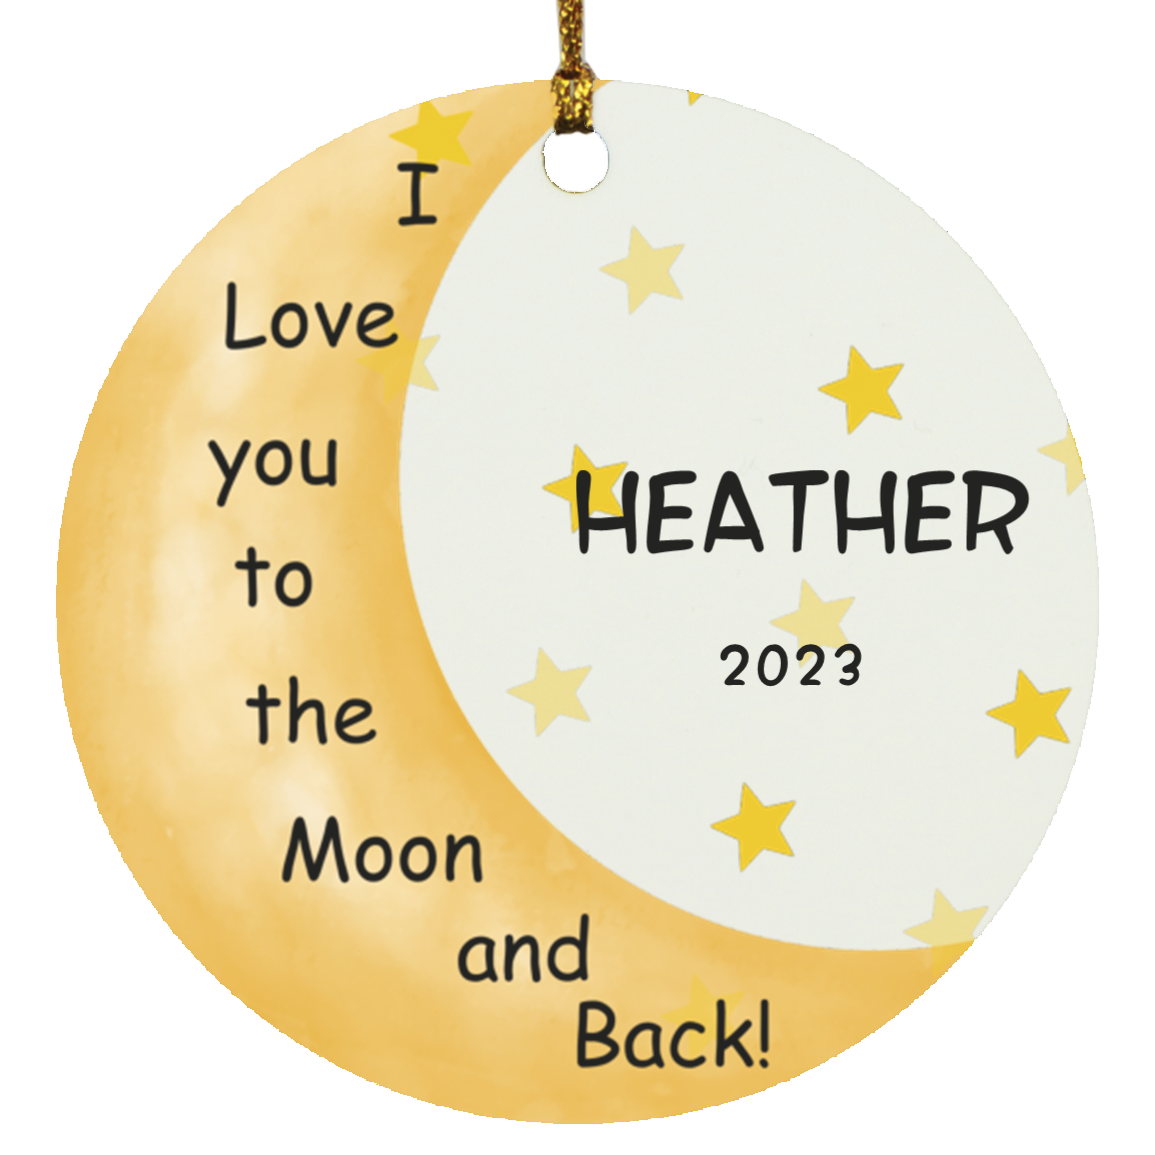 I Love You to the Moon and Back! Personalized Ornament